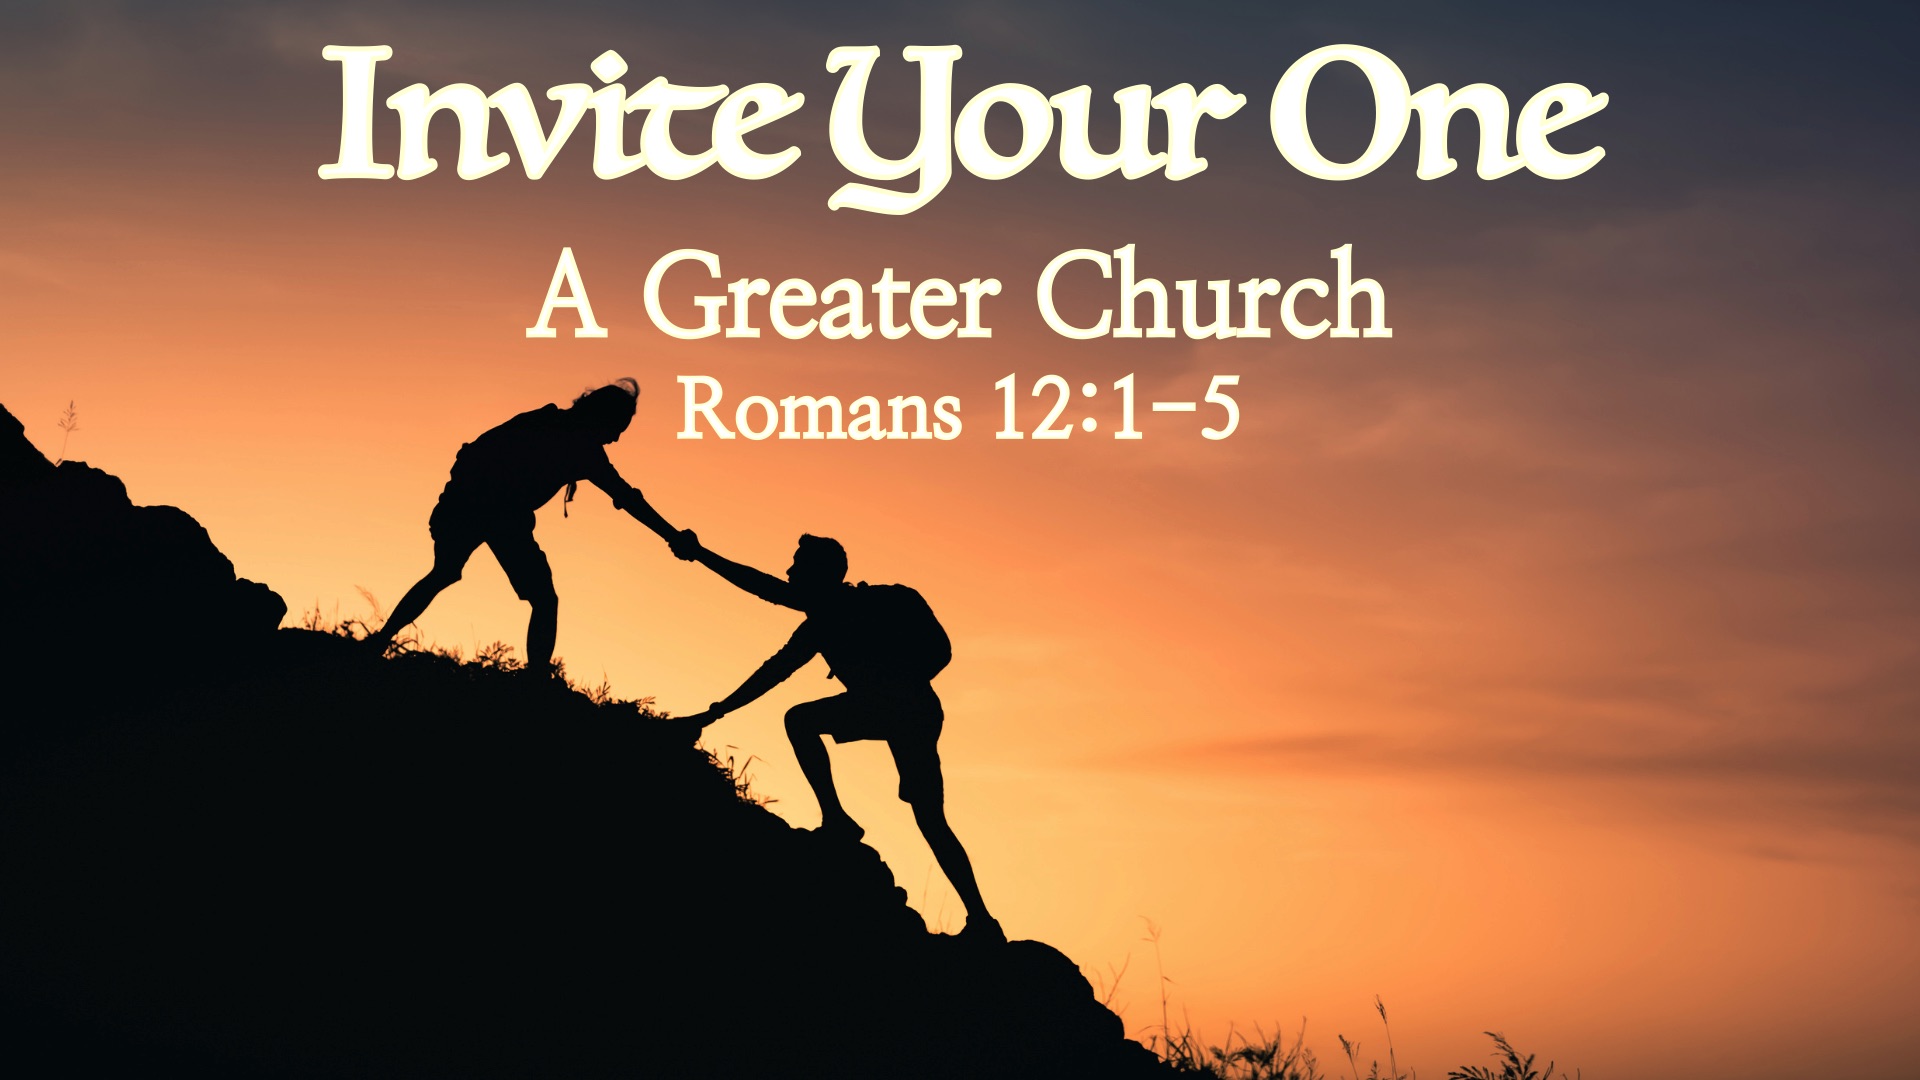 “Invite Your One: A Greater Church”